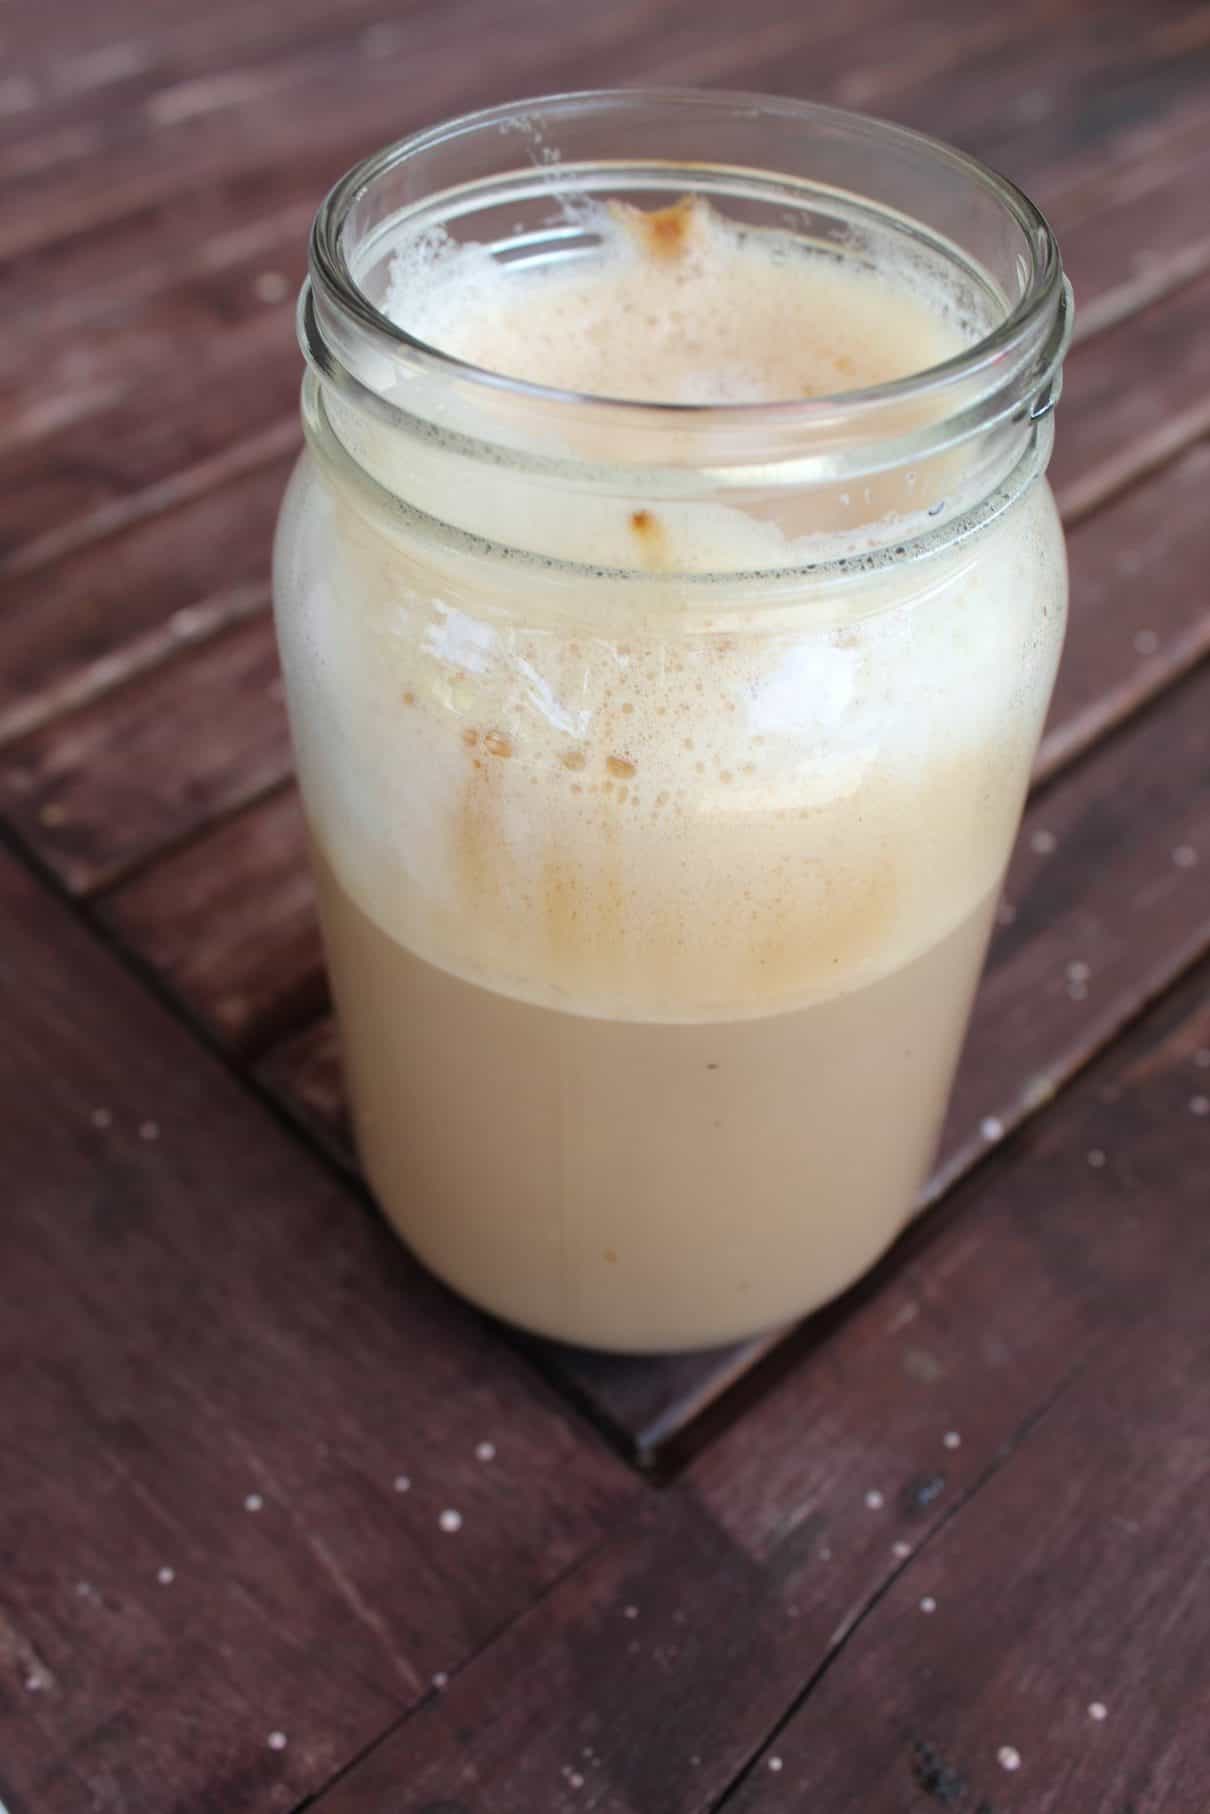 A jar of homemade latte made with frothy milk and whipped instant coffee.